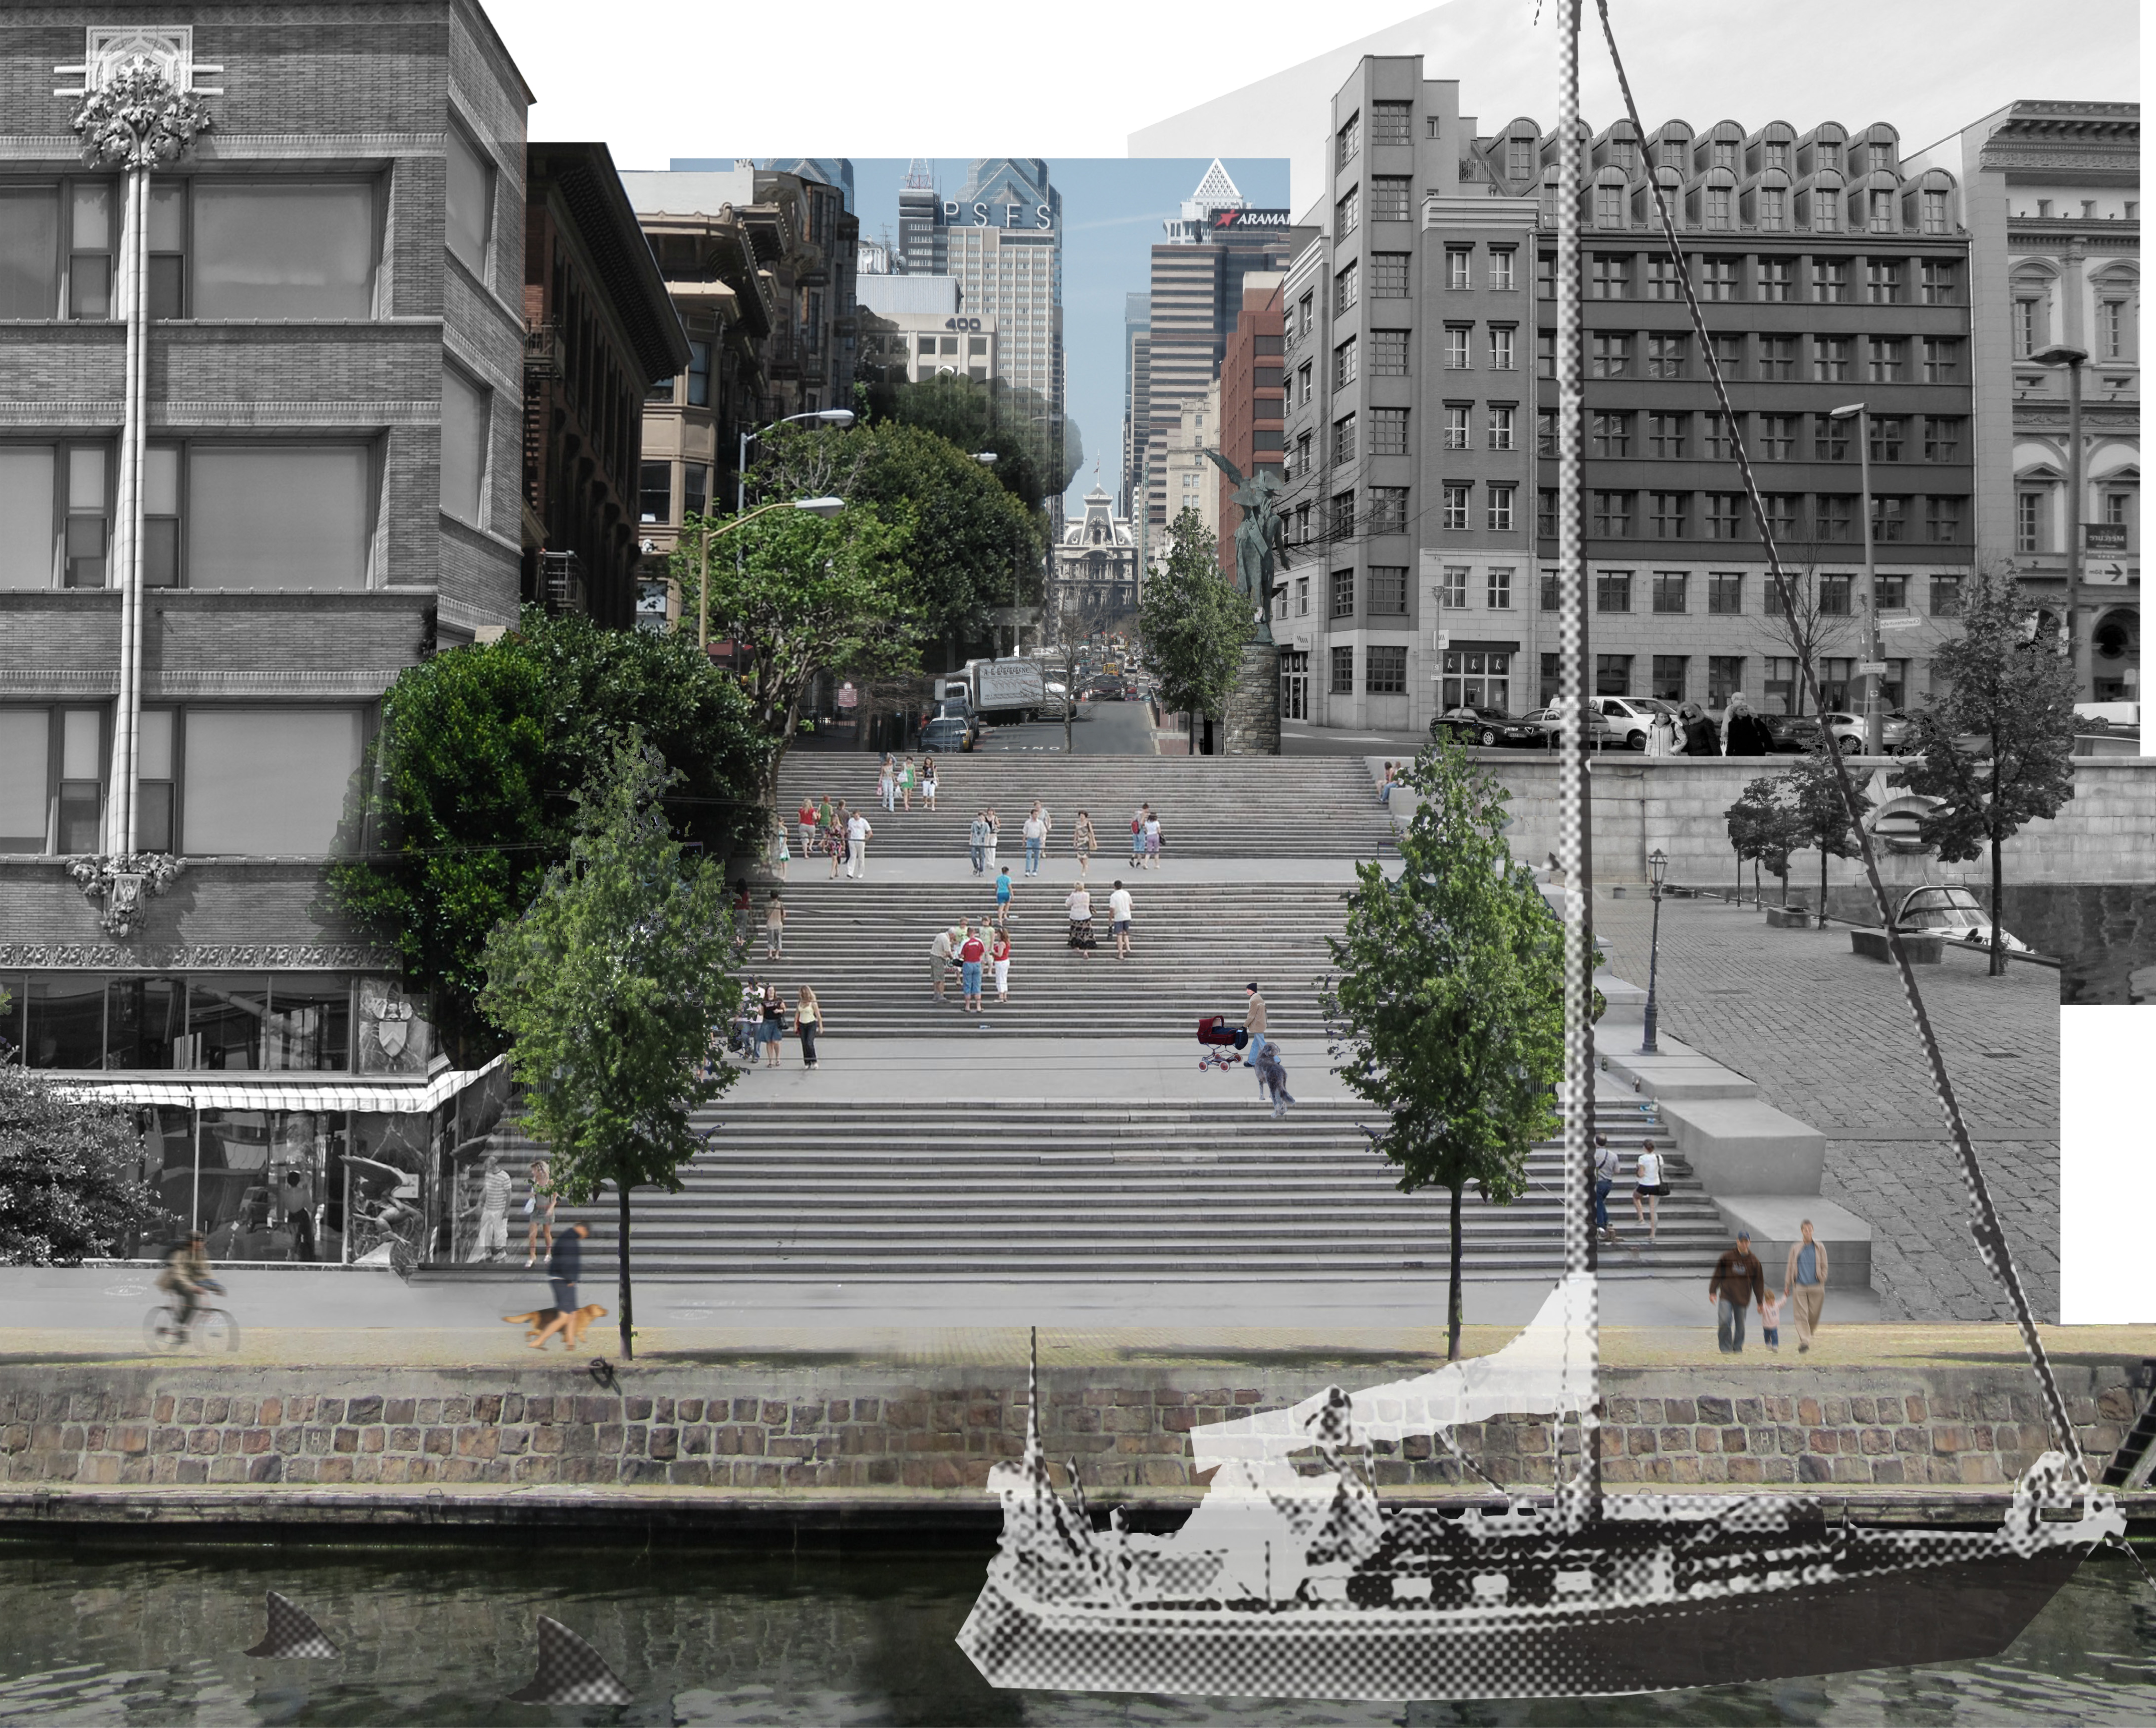 The winning design's grand staircase that would connect river to city at Market Street